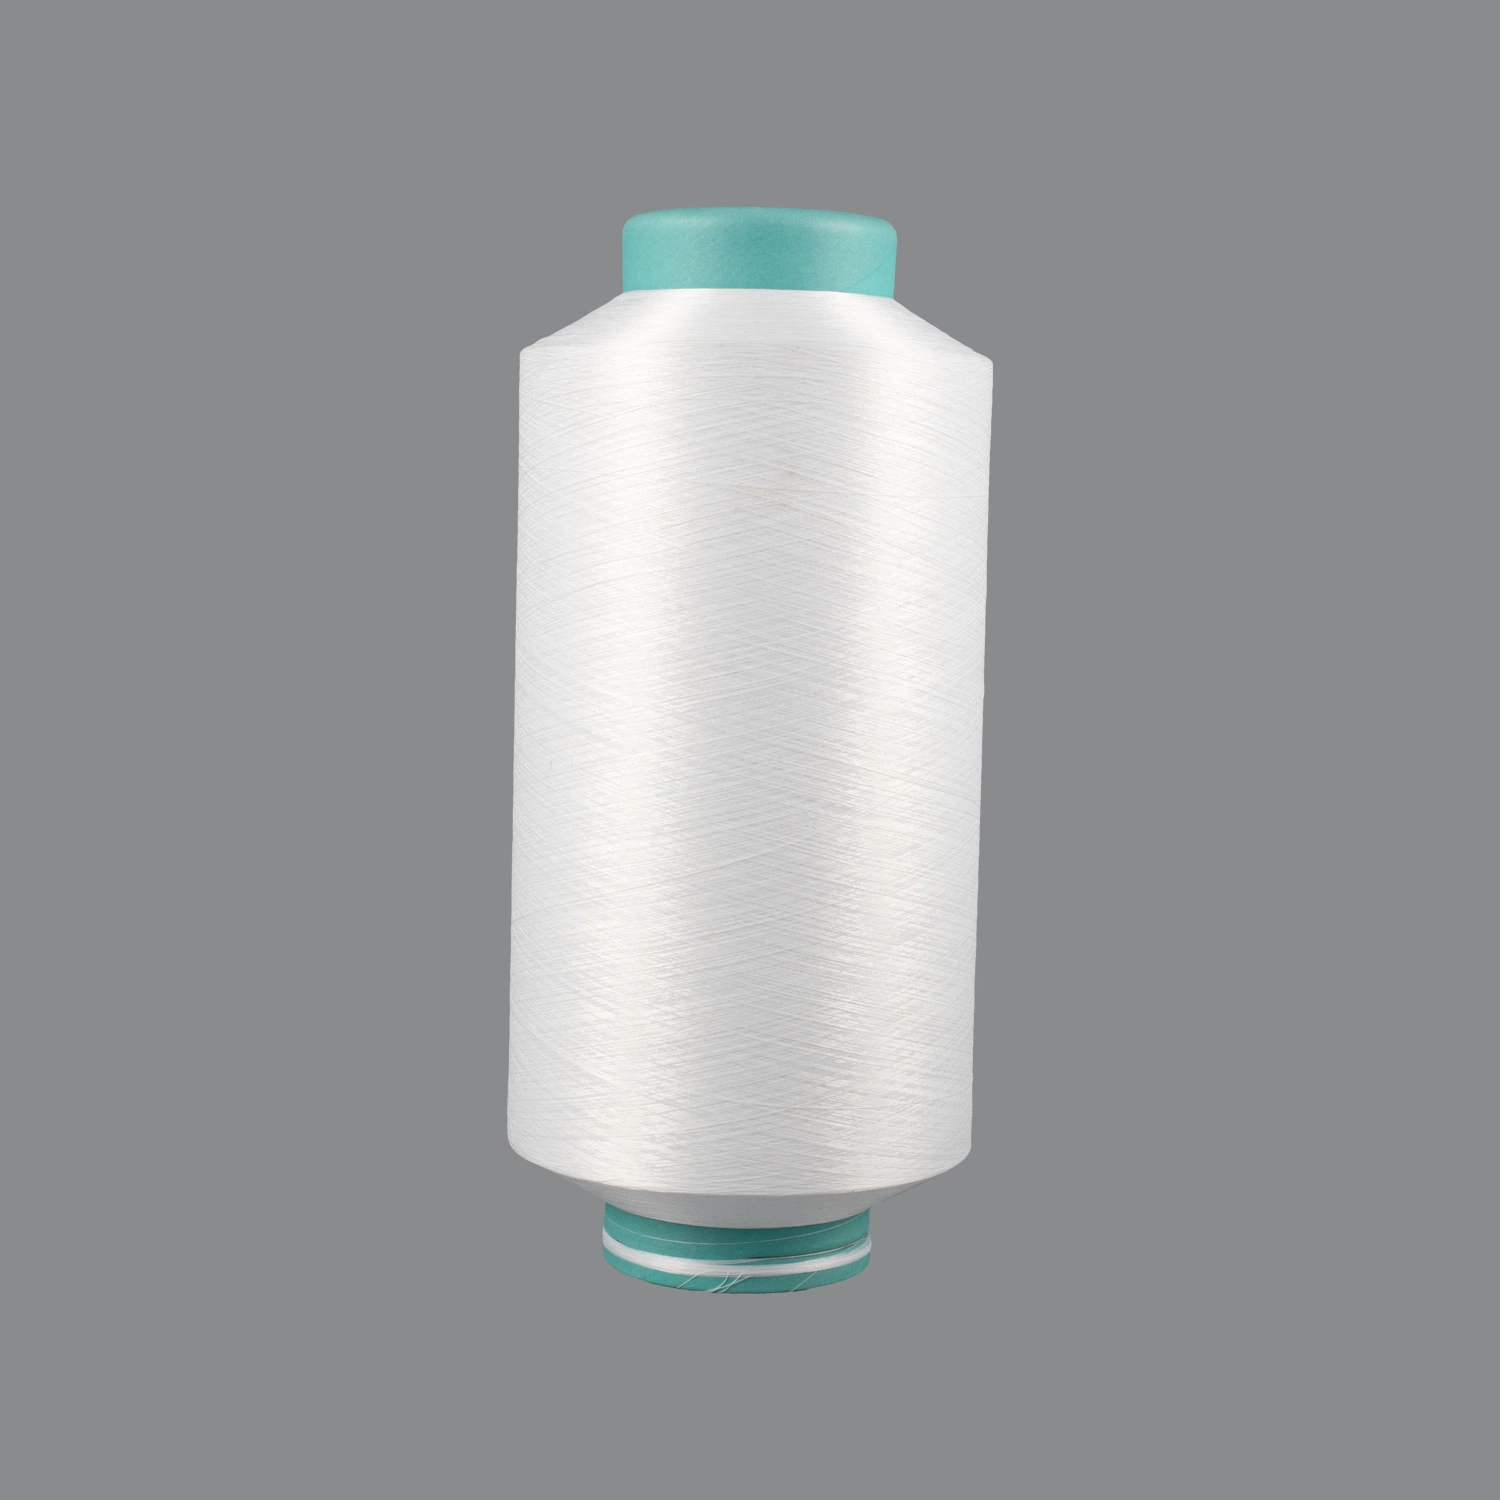 Recycled Grs Polyester Yarn DTY 200d/72f SD Filament Wholesale/Supplier China Manufacturer for Knitting Weaving Warp